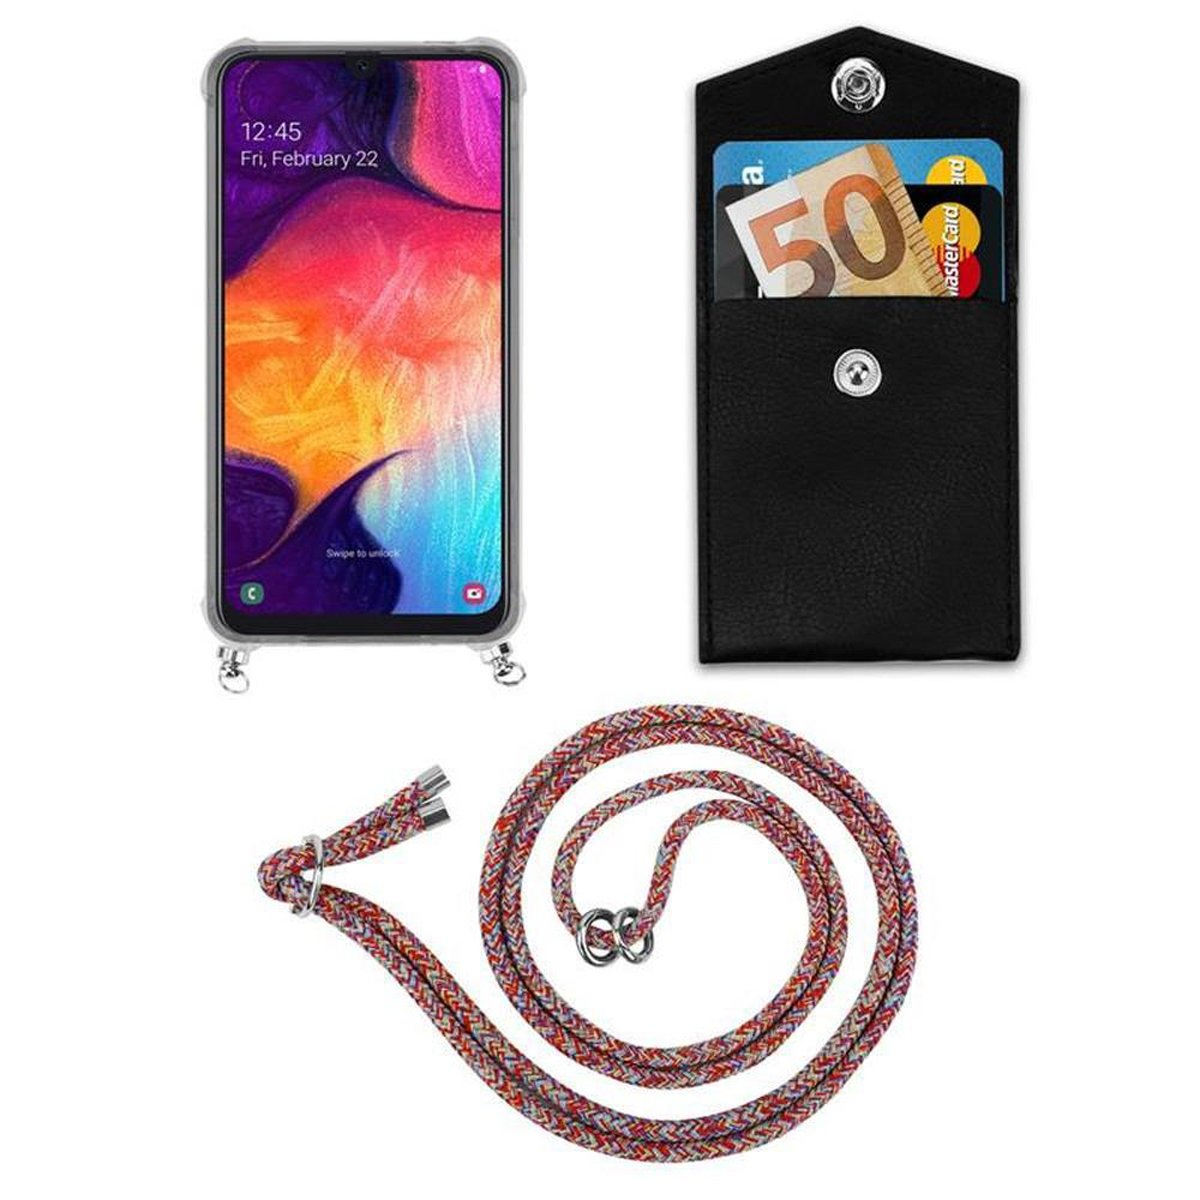 Galaxy 4G Handy Band abnehmbarer mit Hülle, / / Samsung, Silber CADORABO A50s A30s, Kette Ringen, COLORFUL und Backcover, PARROT A50 Kordel